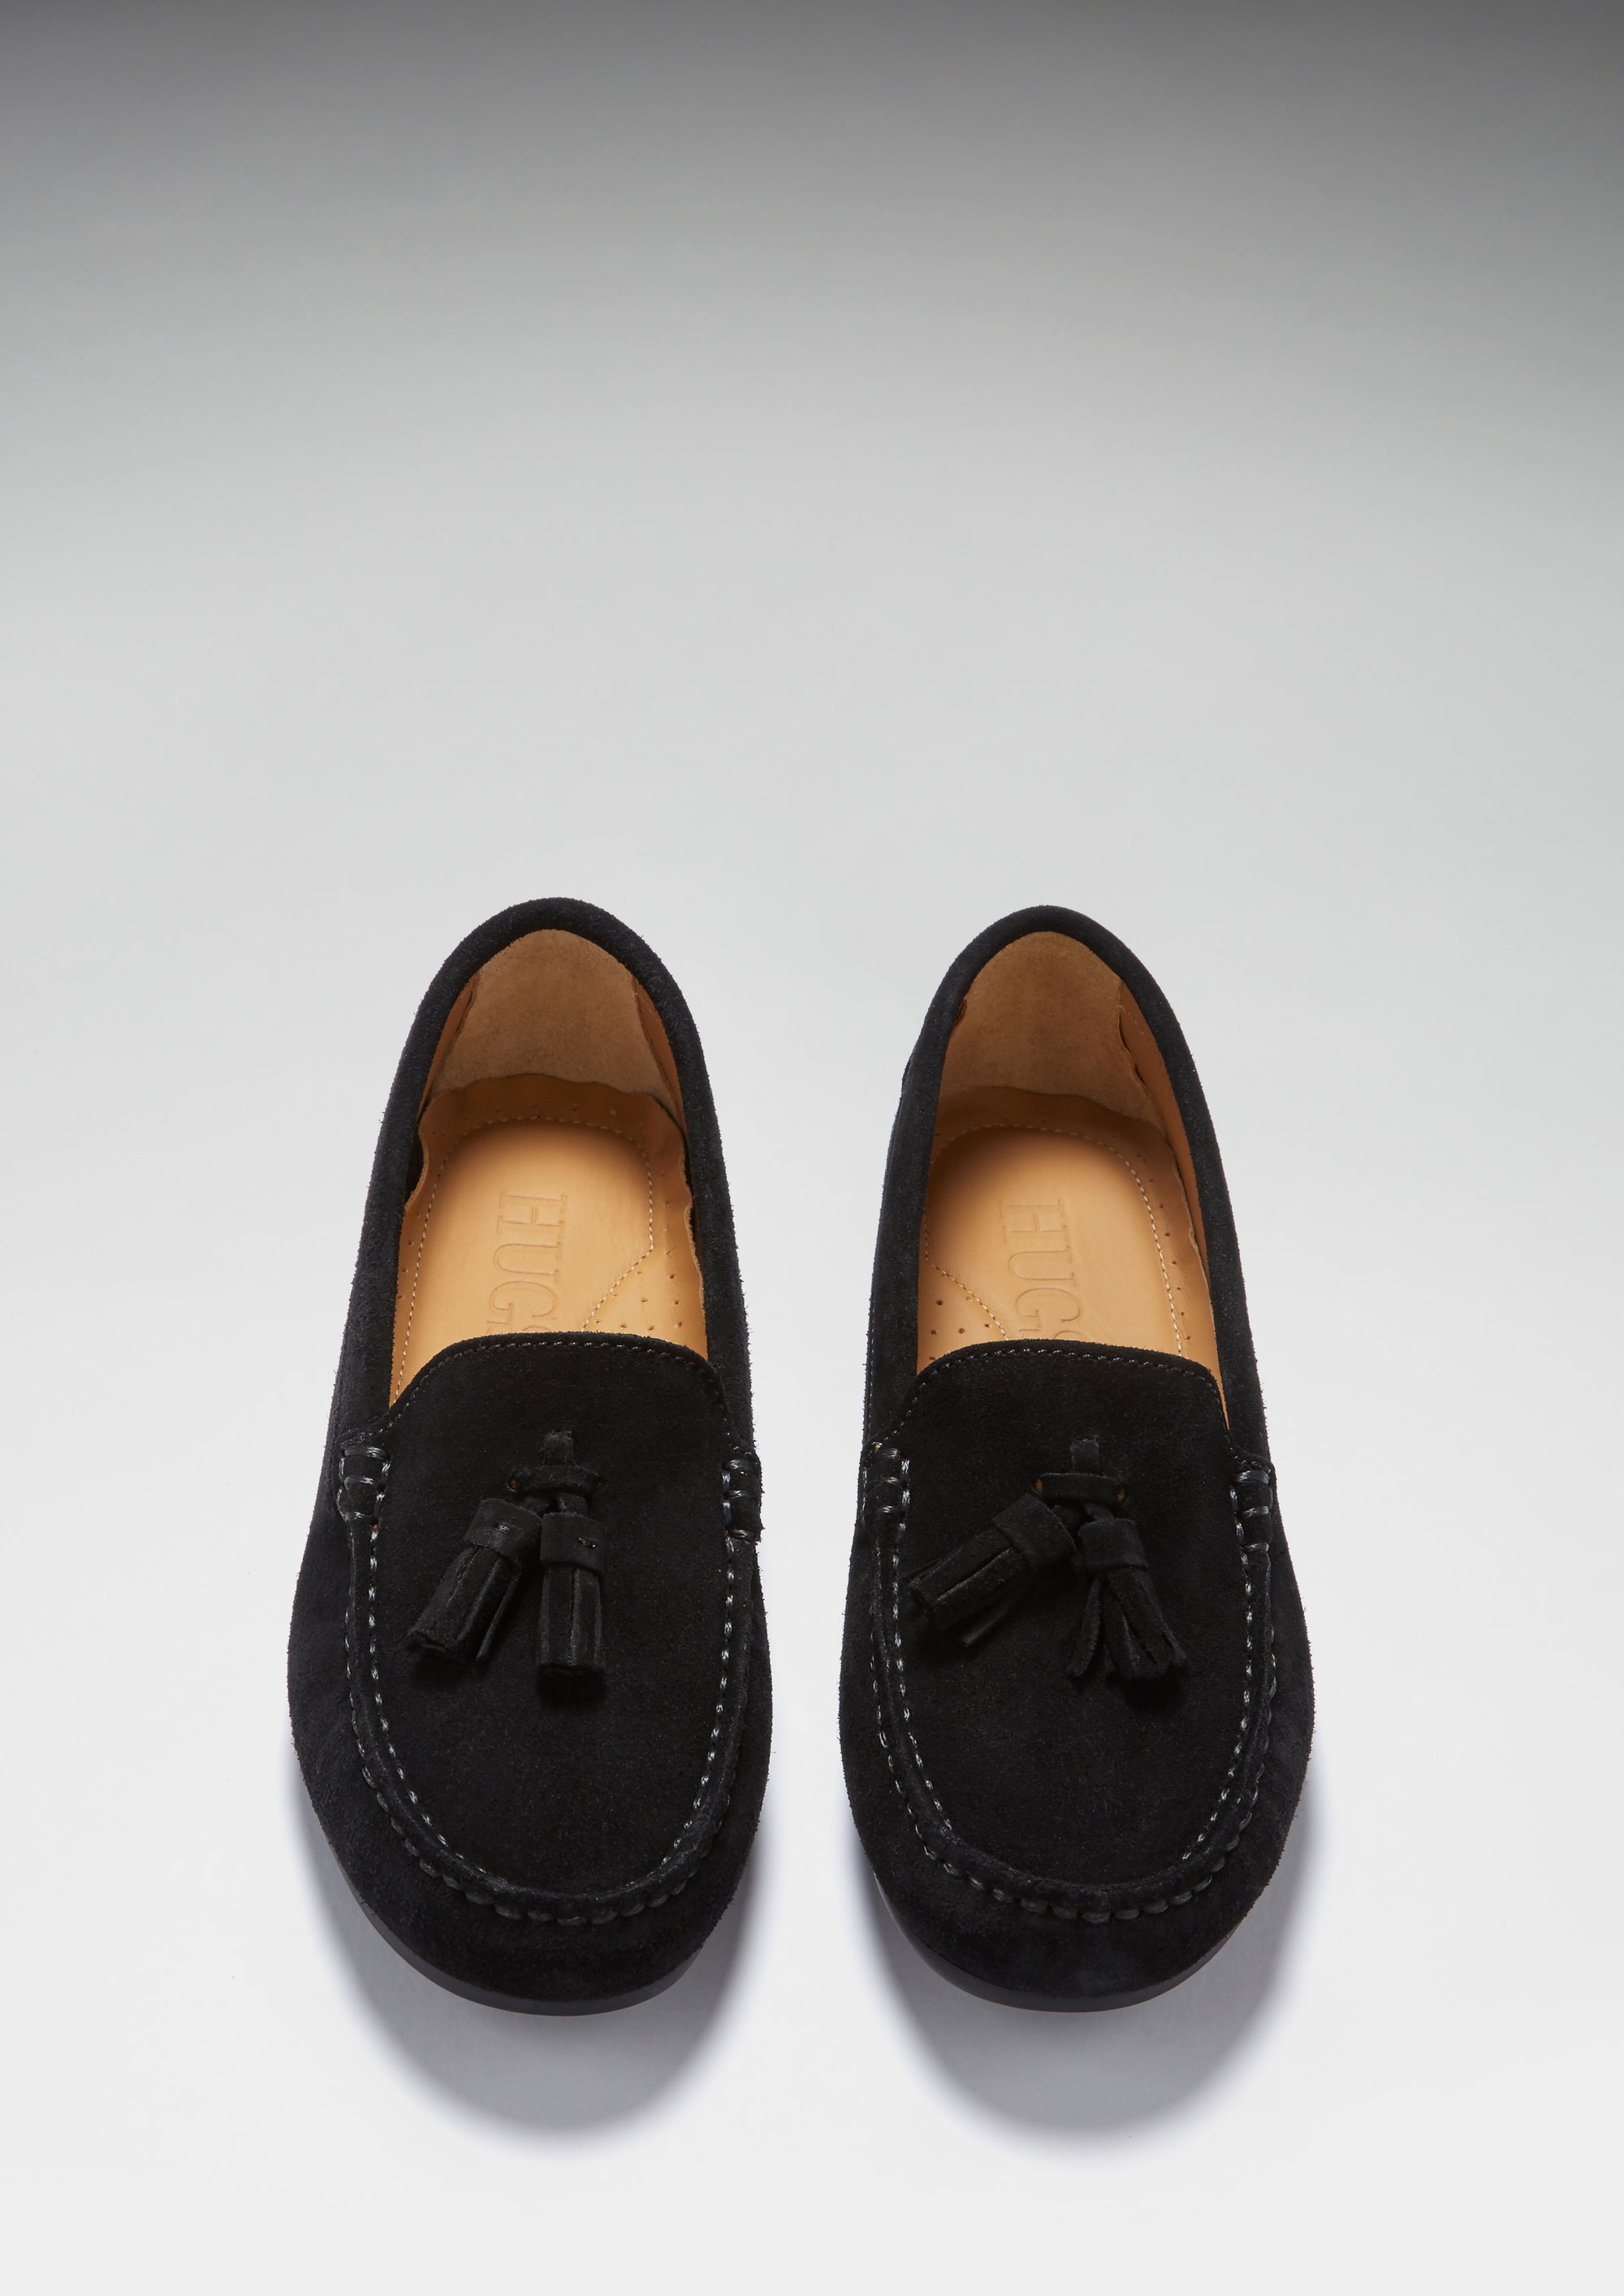 Women's Tasselled Driving Loafers Full Rubber Sole, black suede